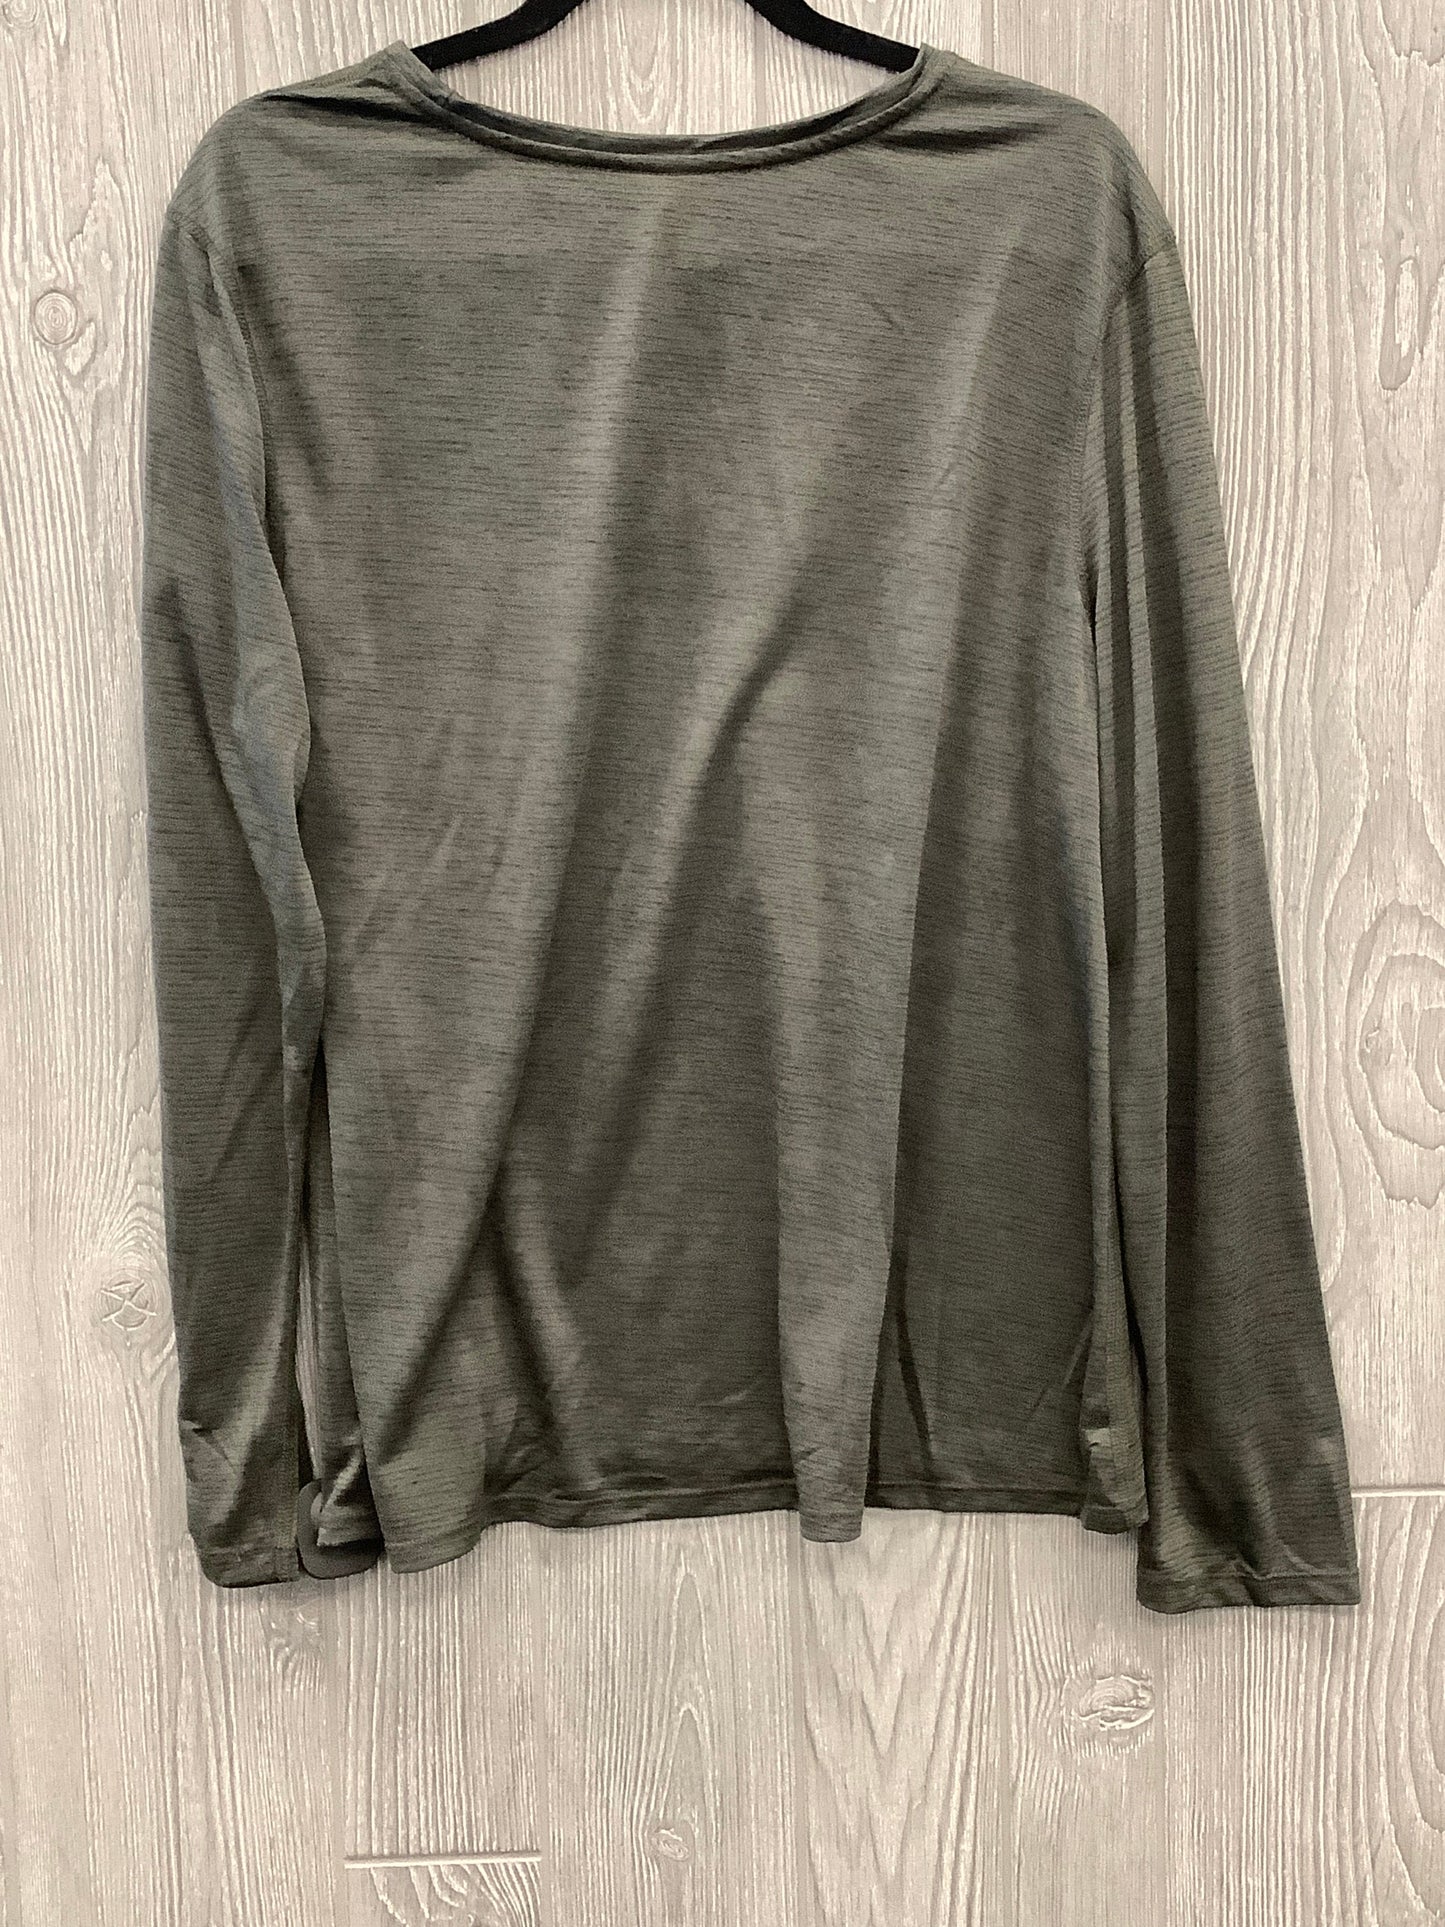 Athletic Top Long Sleeve Crewneck By Athletic Works  Size: 2x